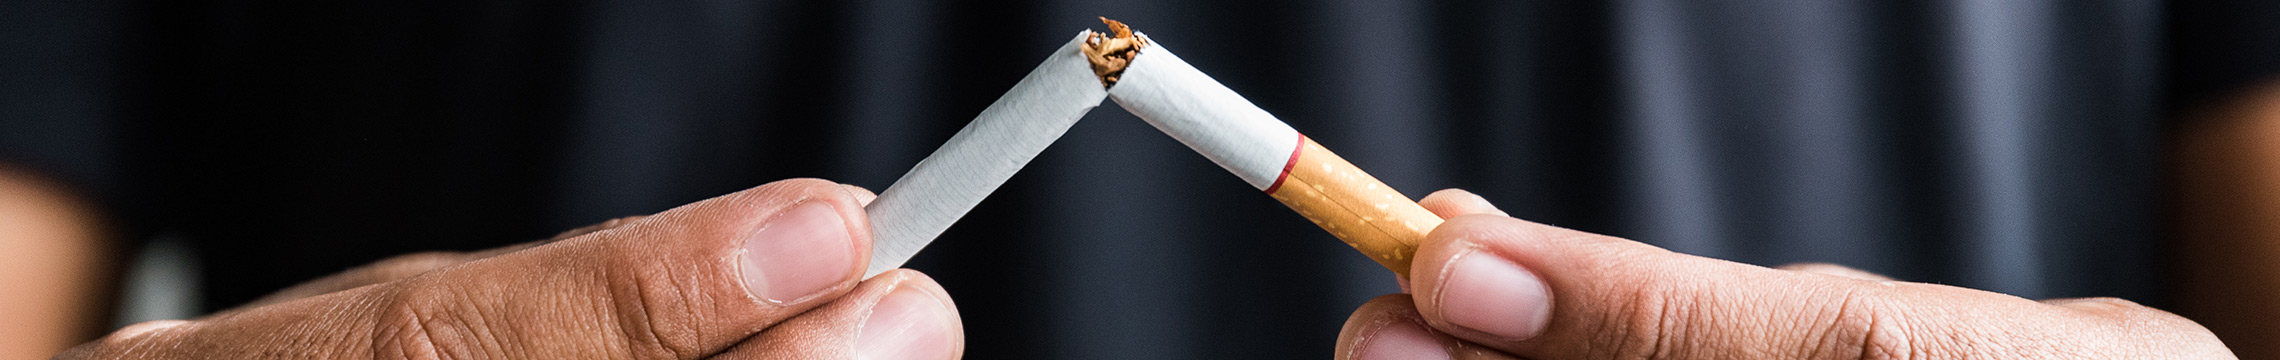 Man snapping cigarette in half with determination to quit smoking